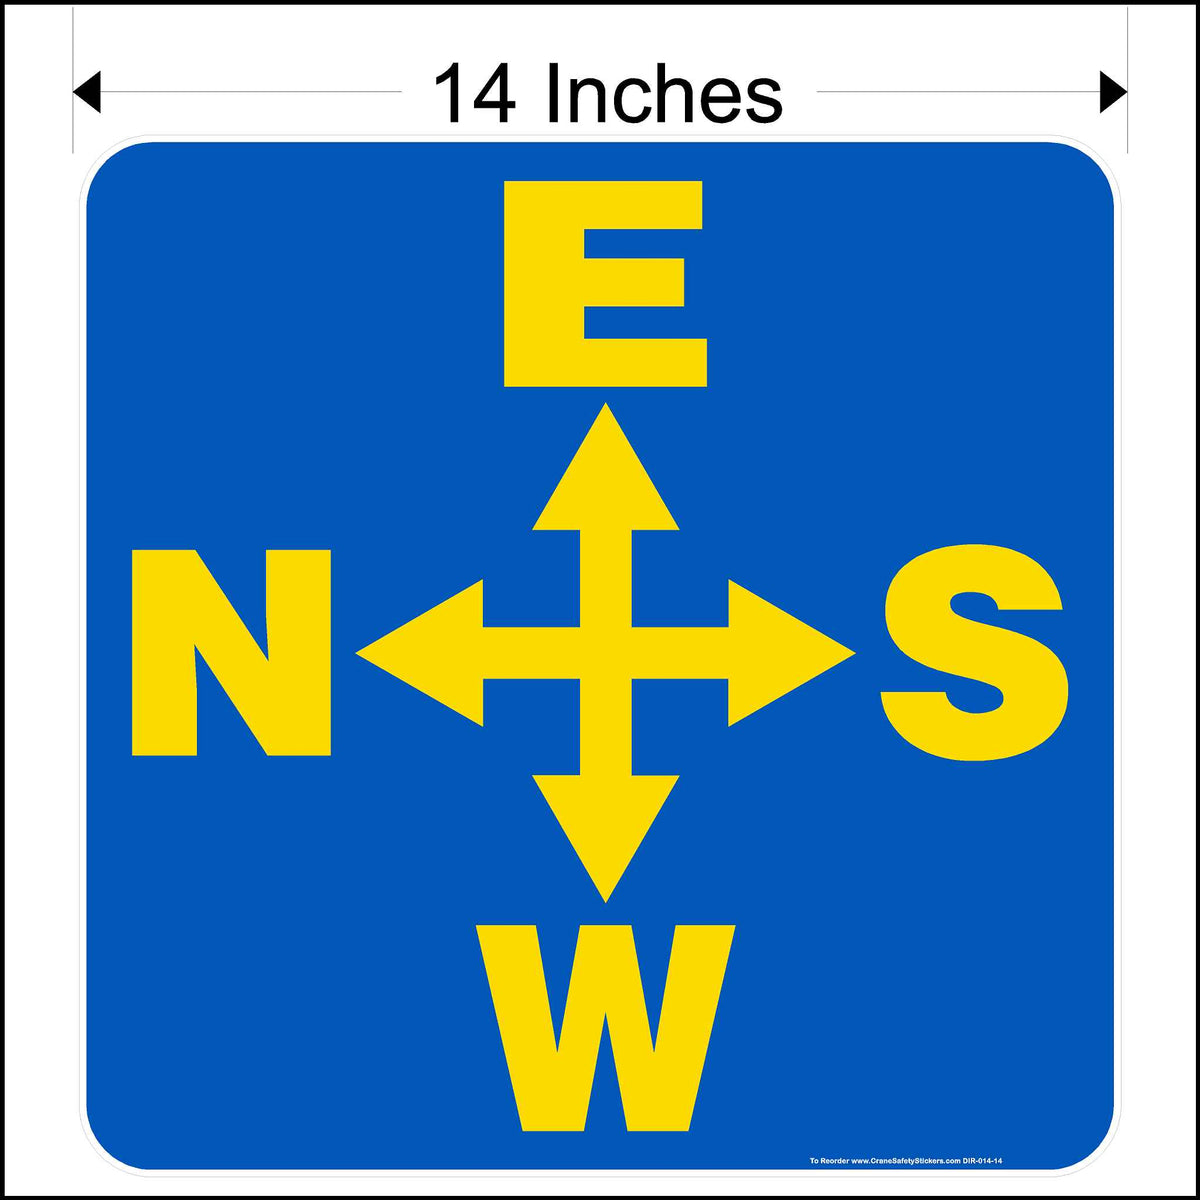 14 Inch overhead crane directional decal. Printed with yellow East, South, West, and North Arrows on a blue background.